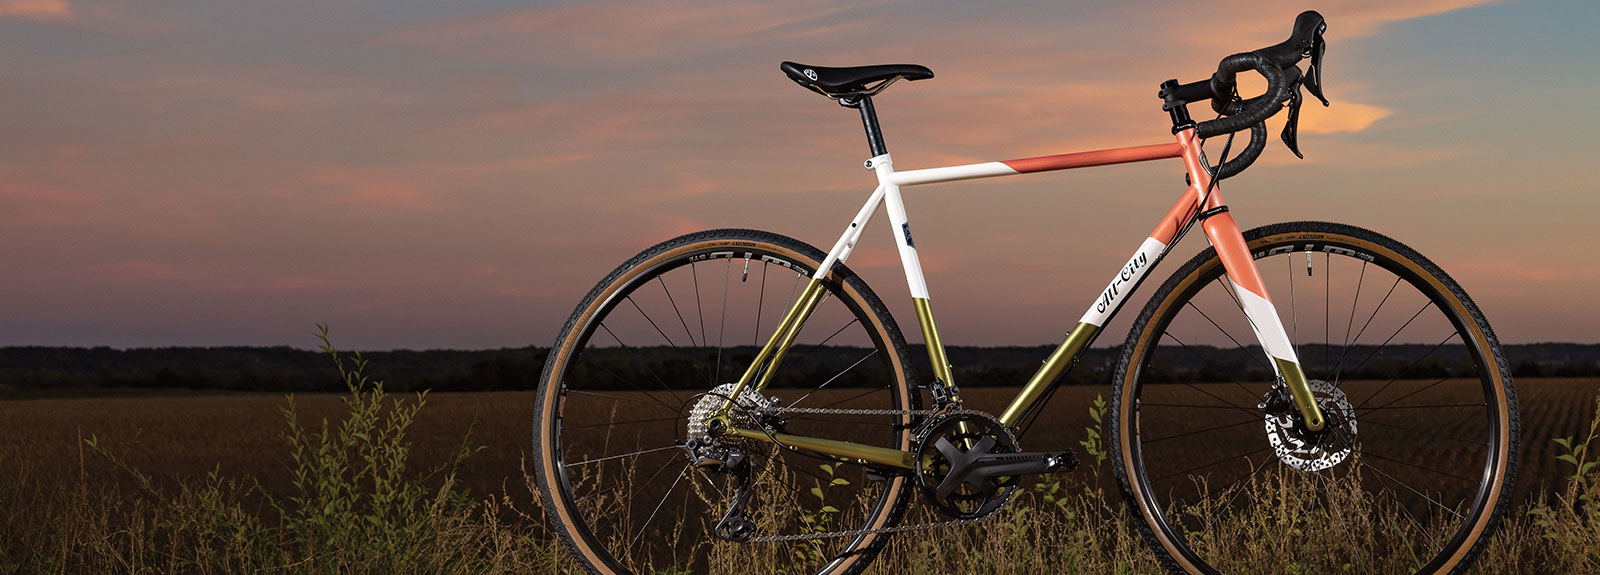 All-City Cosmic Stallion GRX Coral Moss complete bike on gravel road at sunset